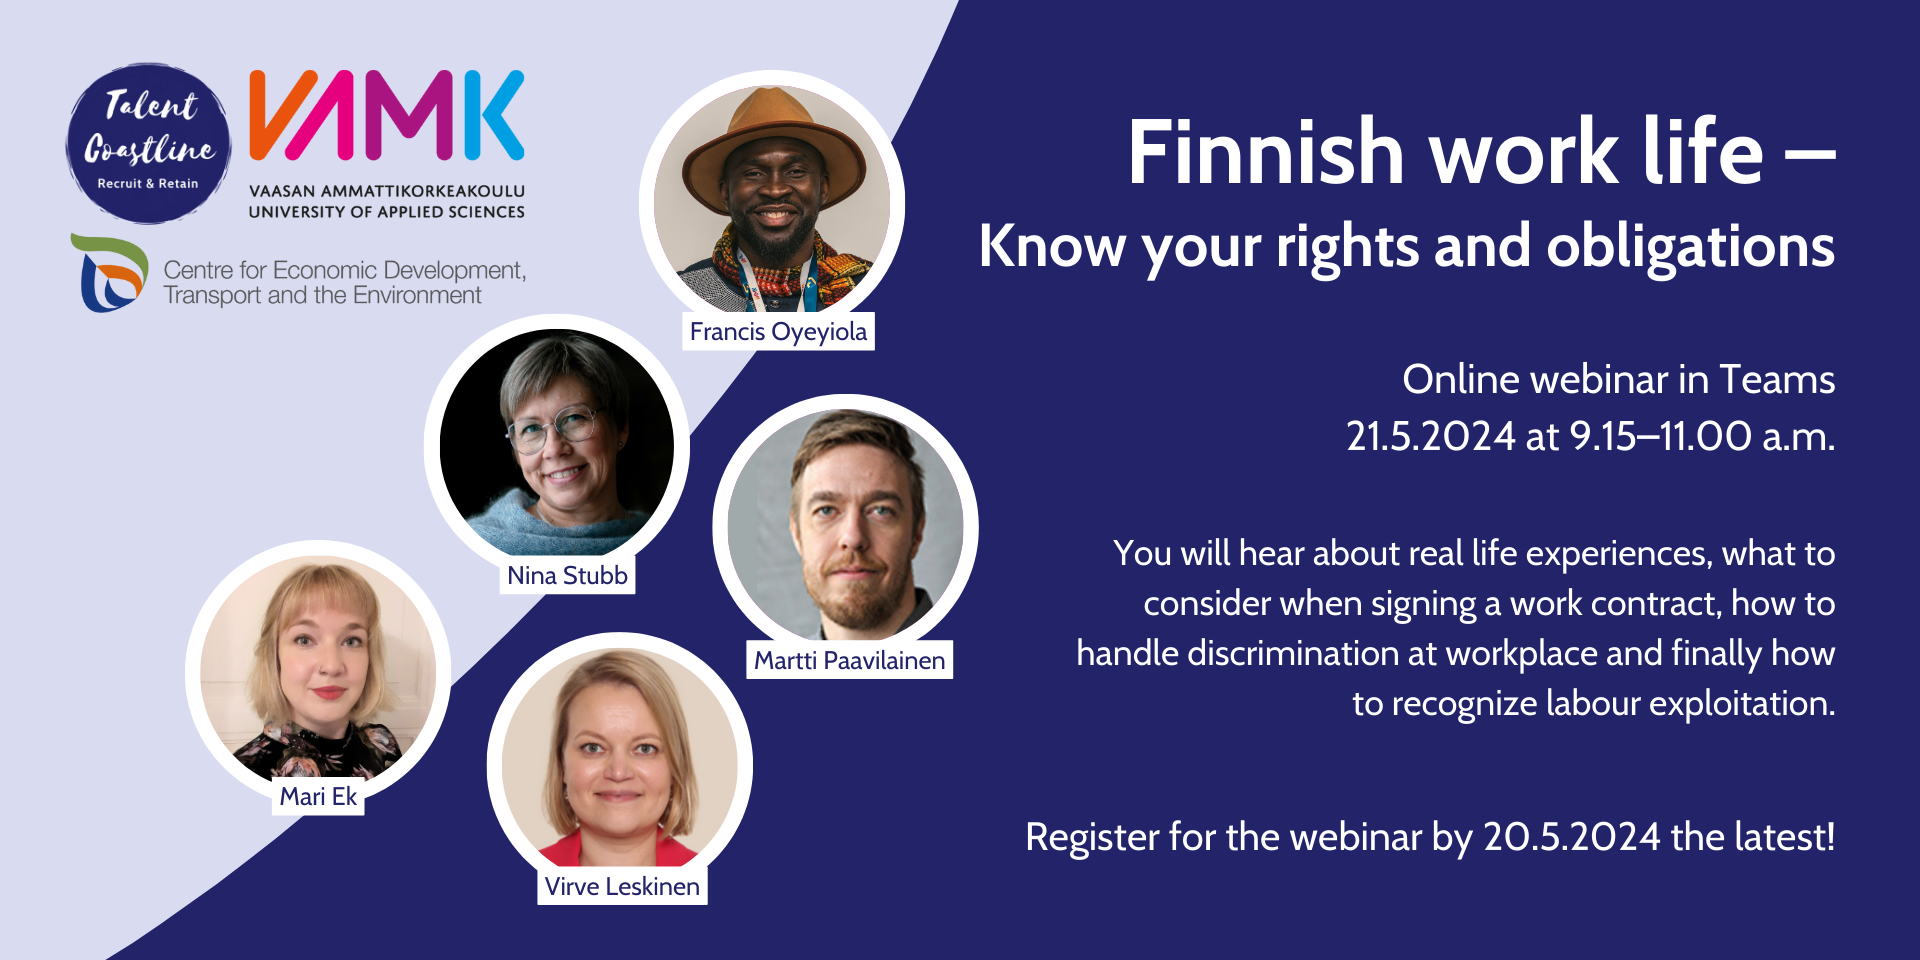 The webinar is organized by Talent Coastline, Vaasa University of Applied Sciences and ELY Center. Speakers are Francis Oyeyiola, Martti Paavilainen, Nina Stubb, Mari Ek and Virve Leskinen. Online webinar in Teams 21.5.2024 at 9.15–11.00 a.m. You will hear about real life experiences, what to consider when signing a work contract, how to handle discrimination at workplace and finally how to recognize labour exploitation. Register for the webinar by 20.5.2024 the latest.